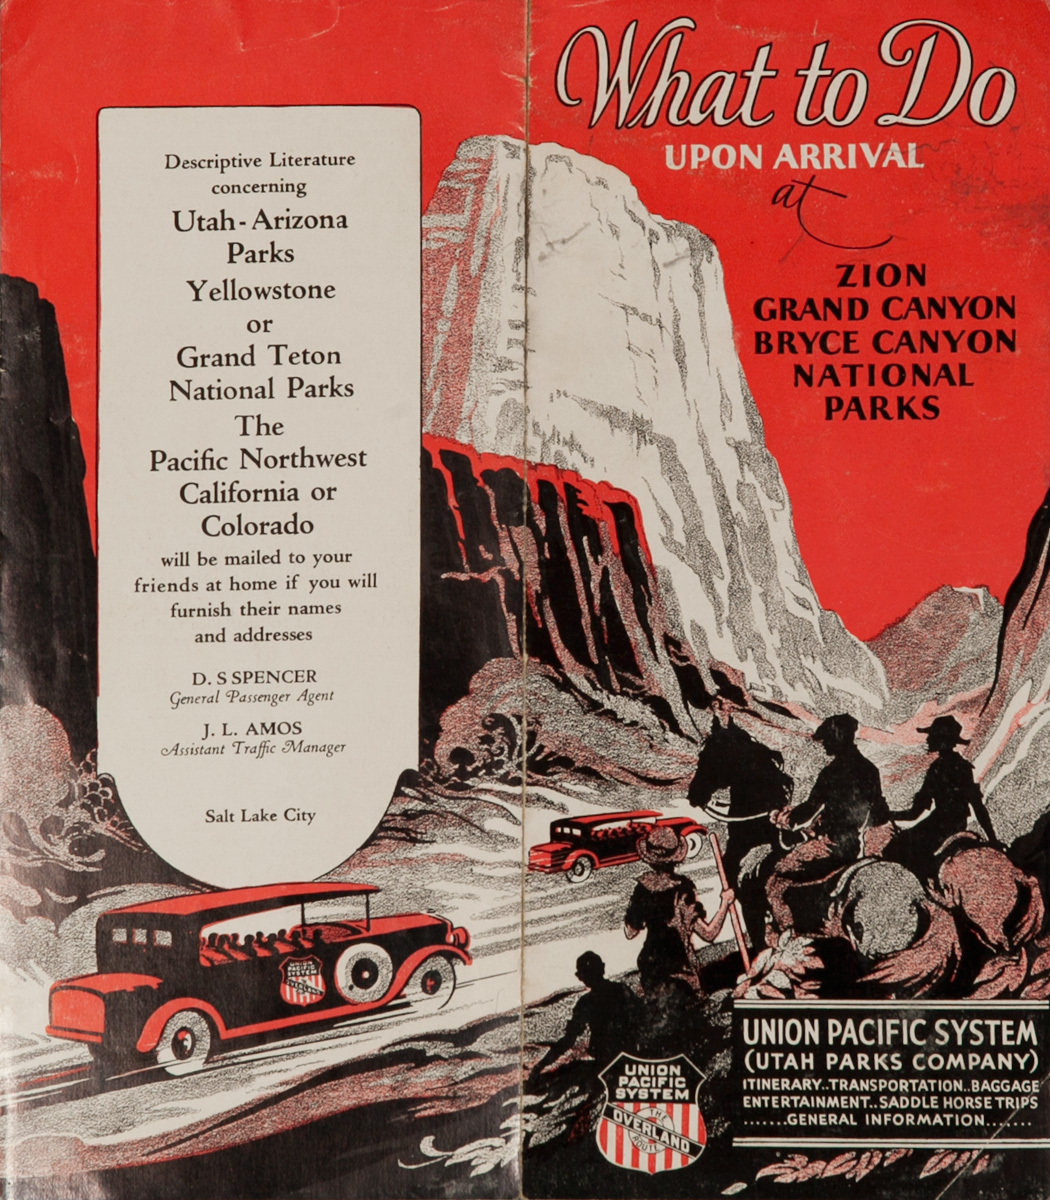 Union Pacific System Original Travel Brochure What To Do Upon Arrival, Zion, Grand Canyon, Bryce Canyon National Parks